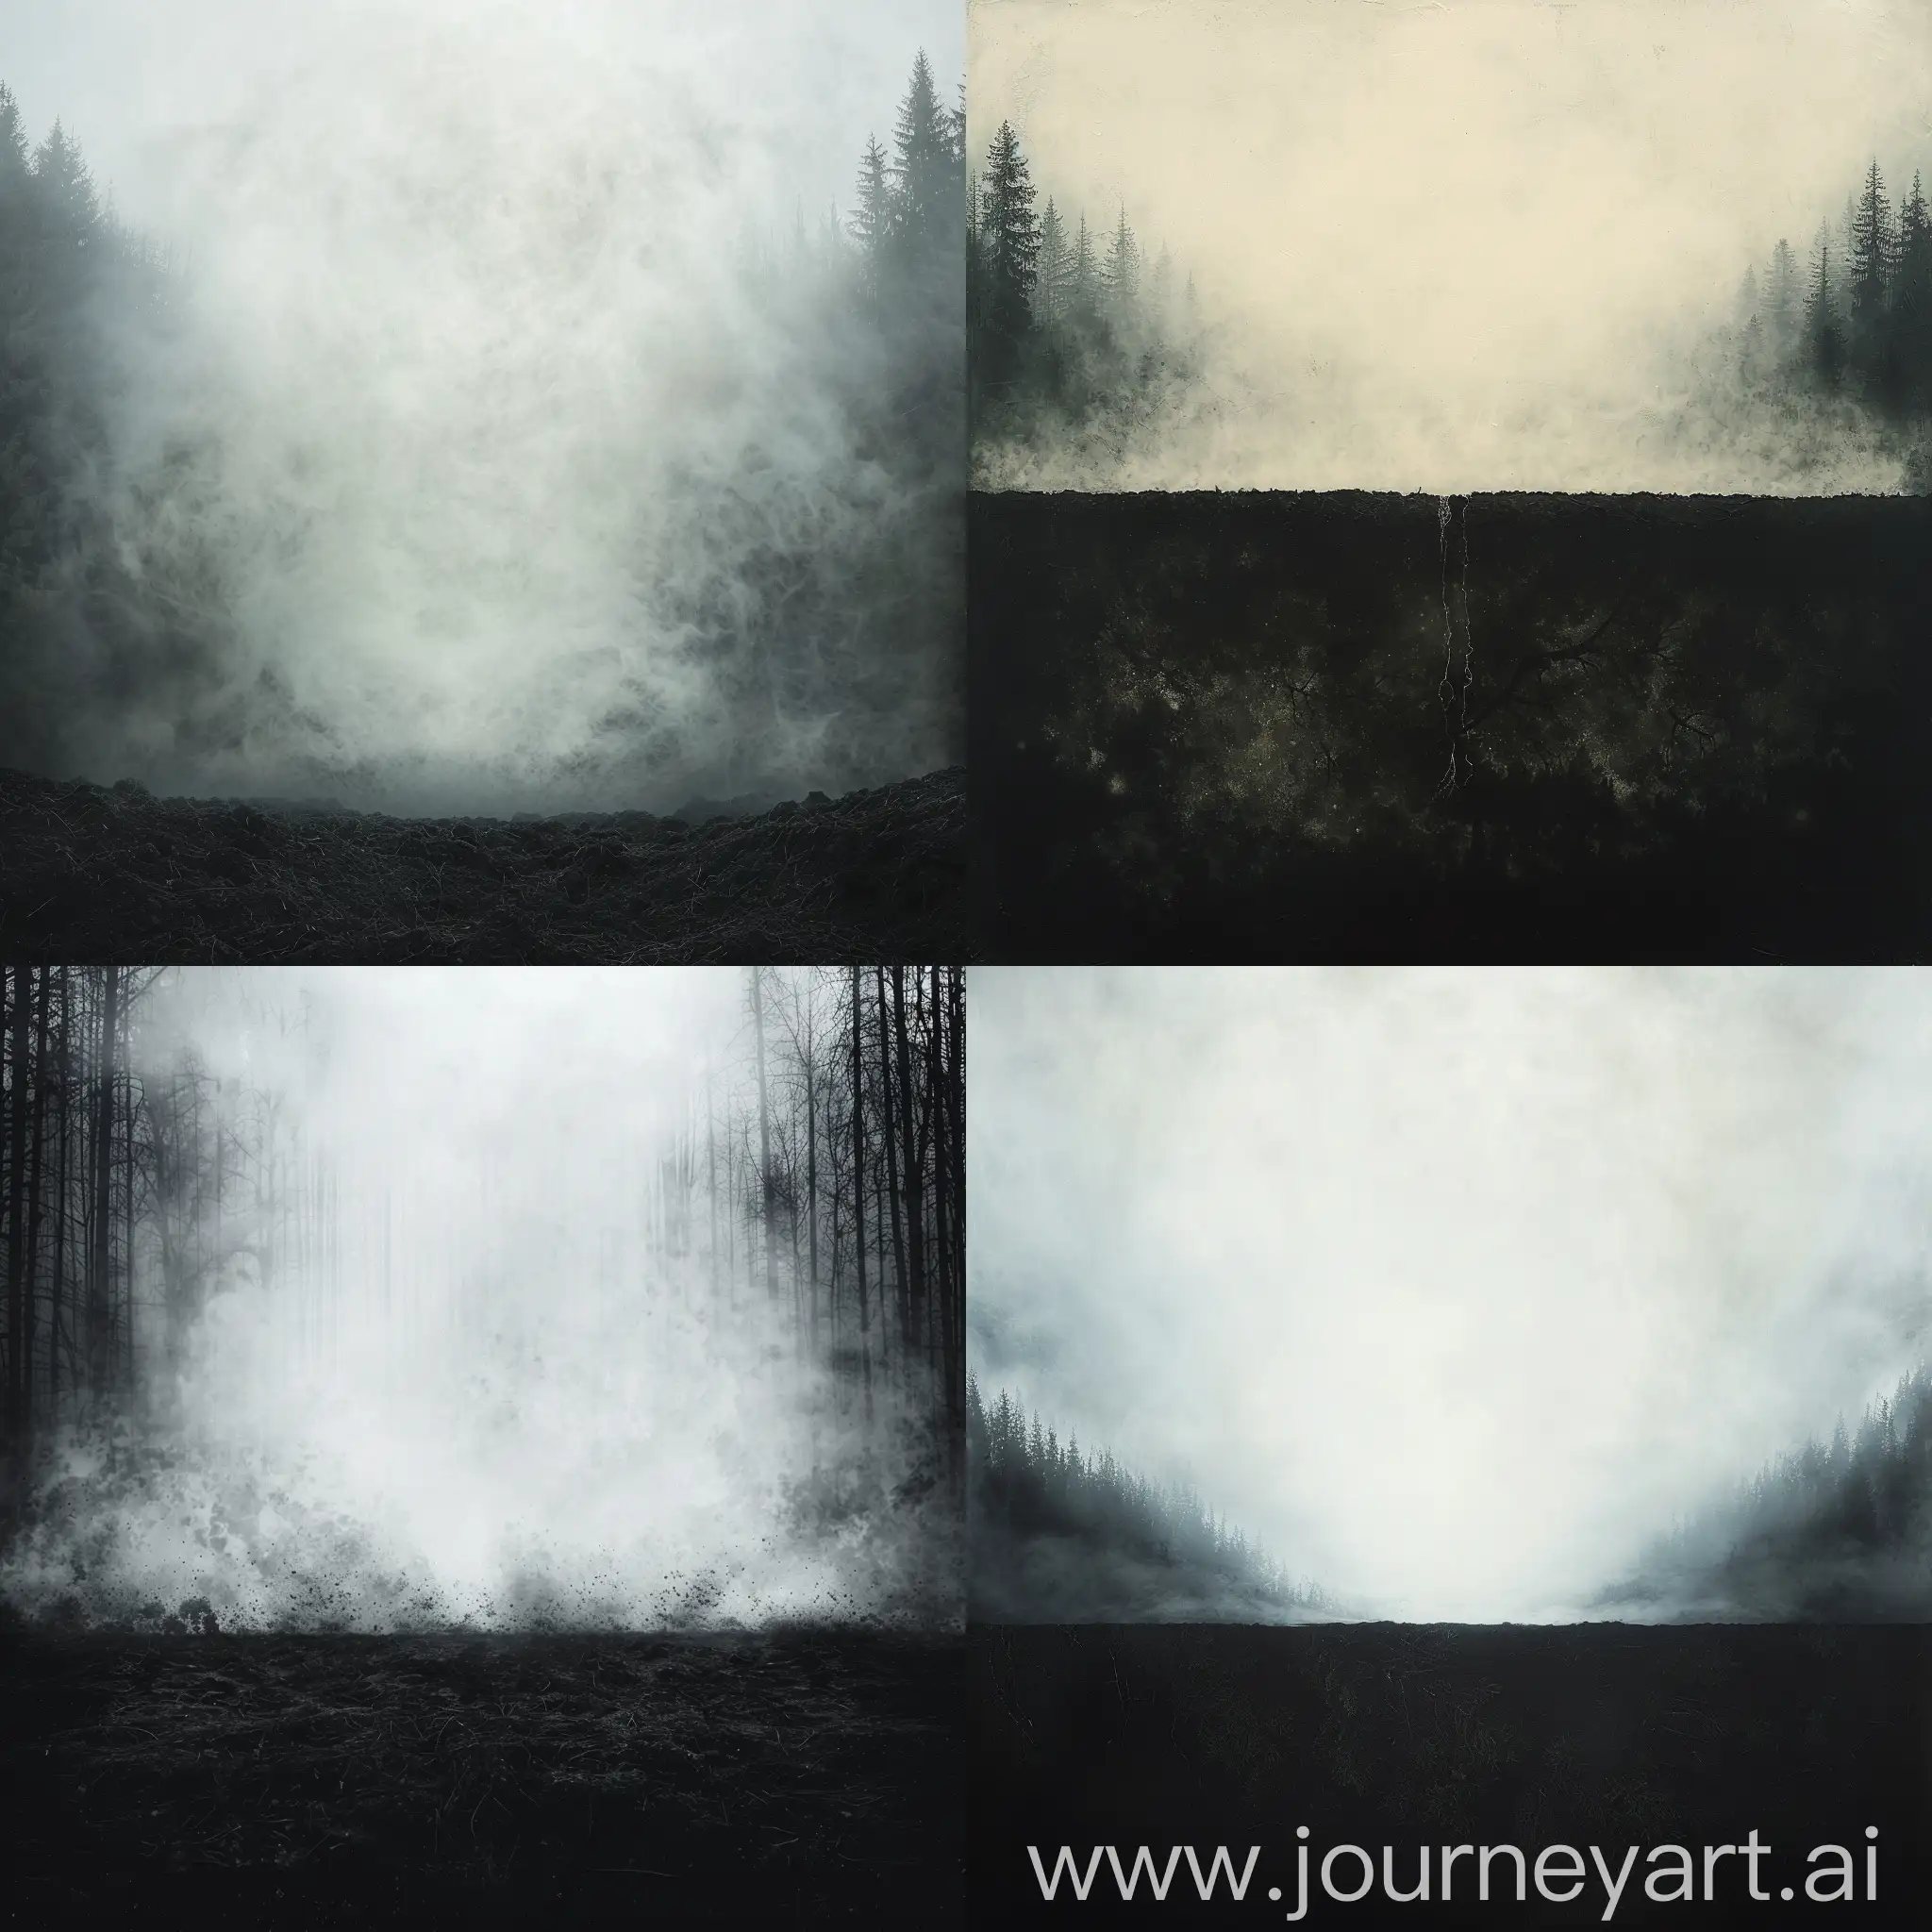 bottom, left and right sides - dark earth and forest.  the middle from above and to the ground is fog, light, ash-white. the fog in the central part completely absorbs the space, and below, to the left and to the right it slightly envelops the forest and the ground, but they, nevertheless, must be visible and readable. horror atmosphere